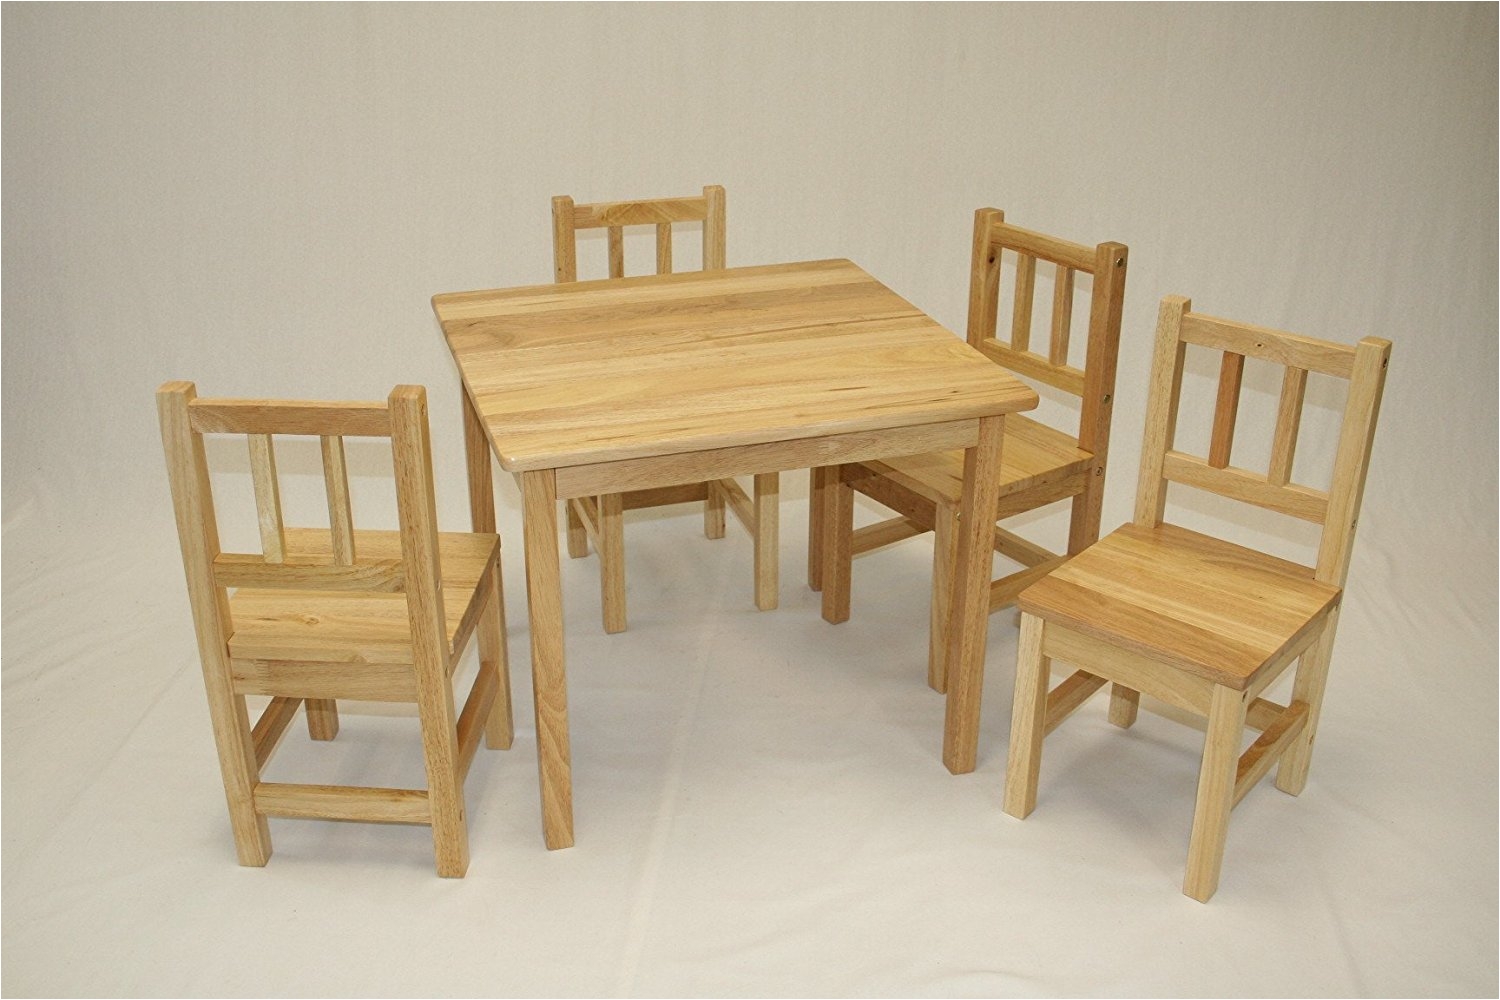 marvelous small table and chairs 25 wooden play chair sets the land of nod set for toddlers l 34a1b8b91898374a